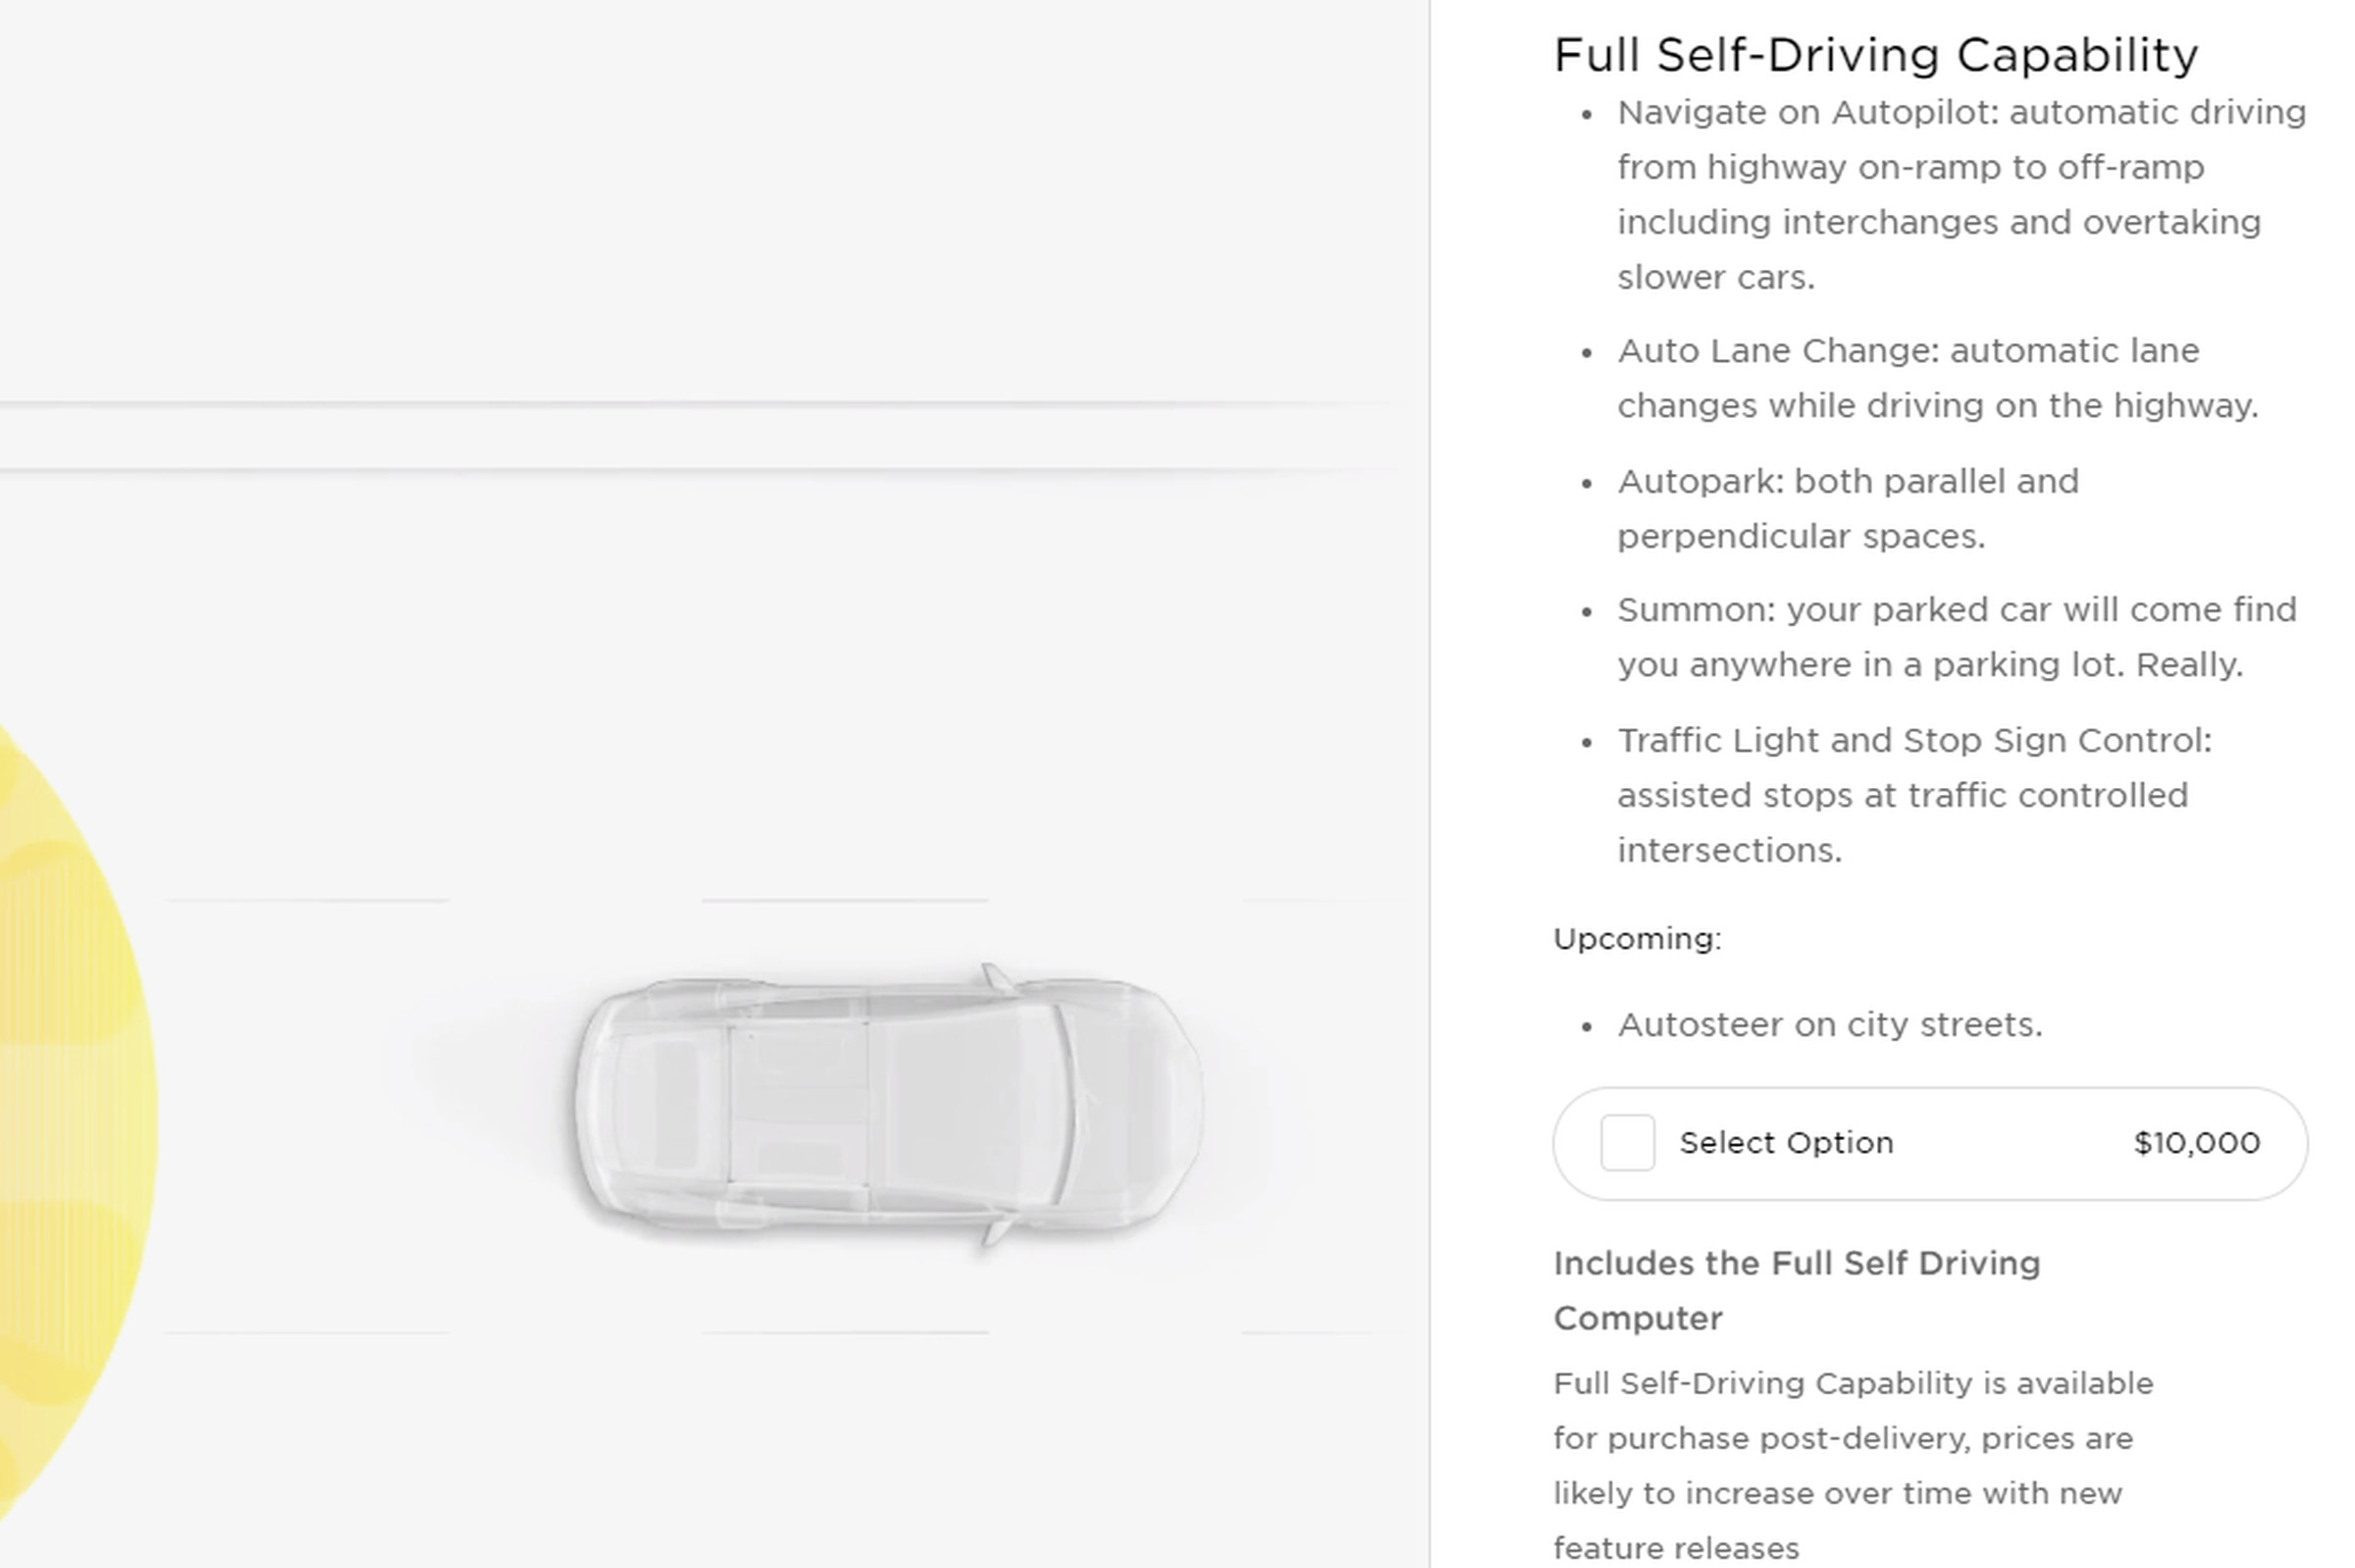 Tesla’s website, showing the Full Self-Driving option at its new $10,000 price point.